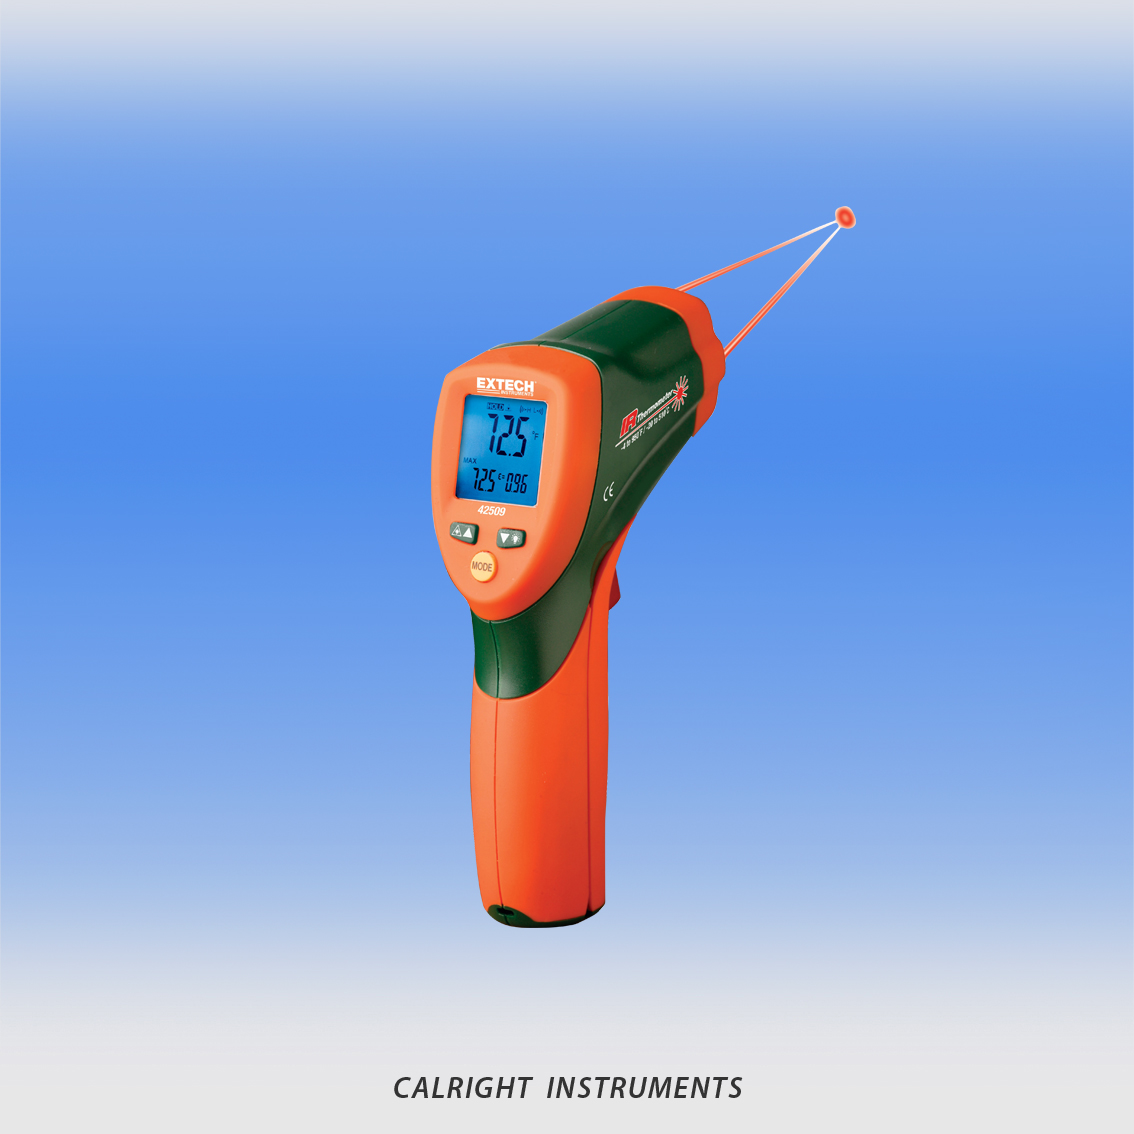 Extech IR320 Waterproof Dual Laser Infrared Thermometer with Alarm